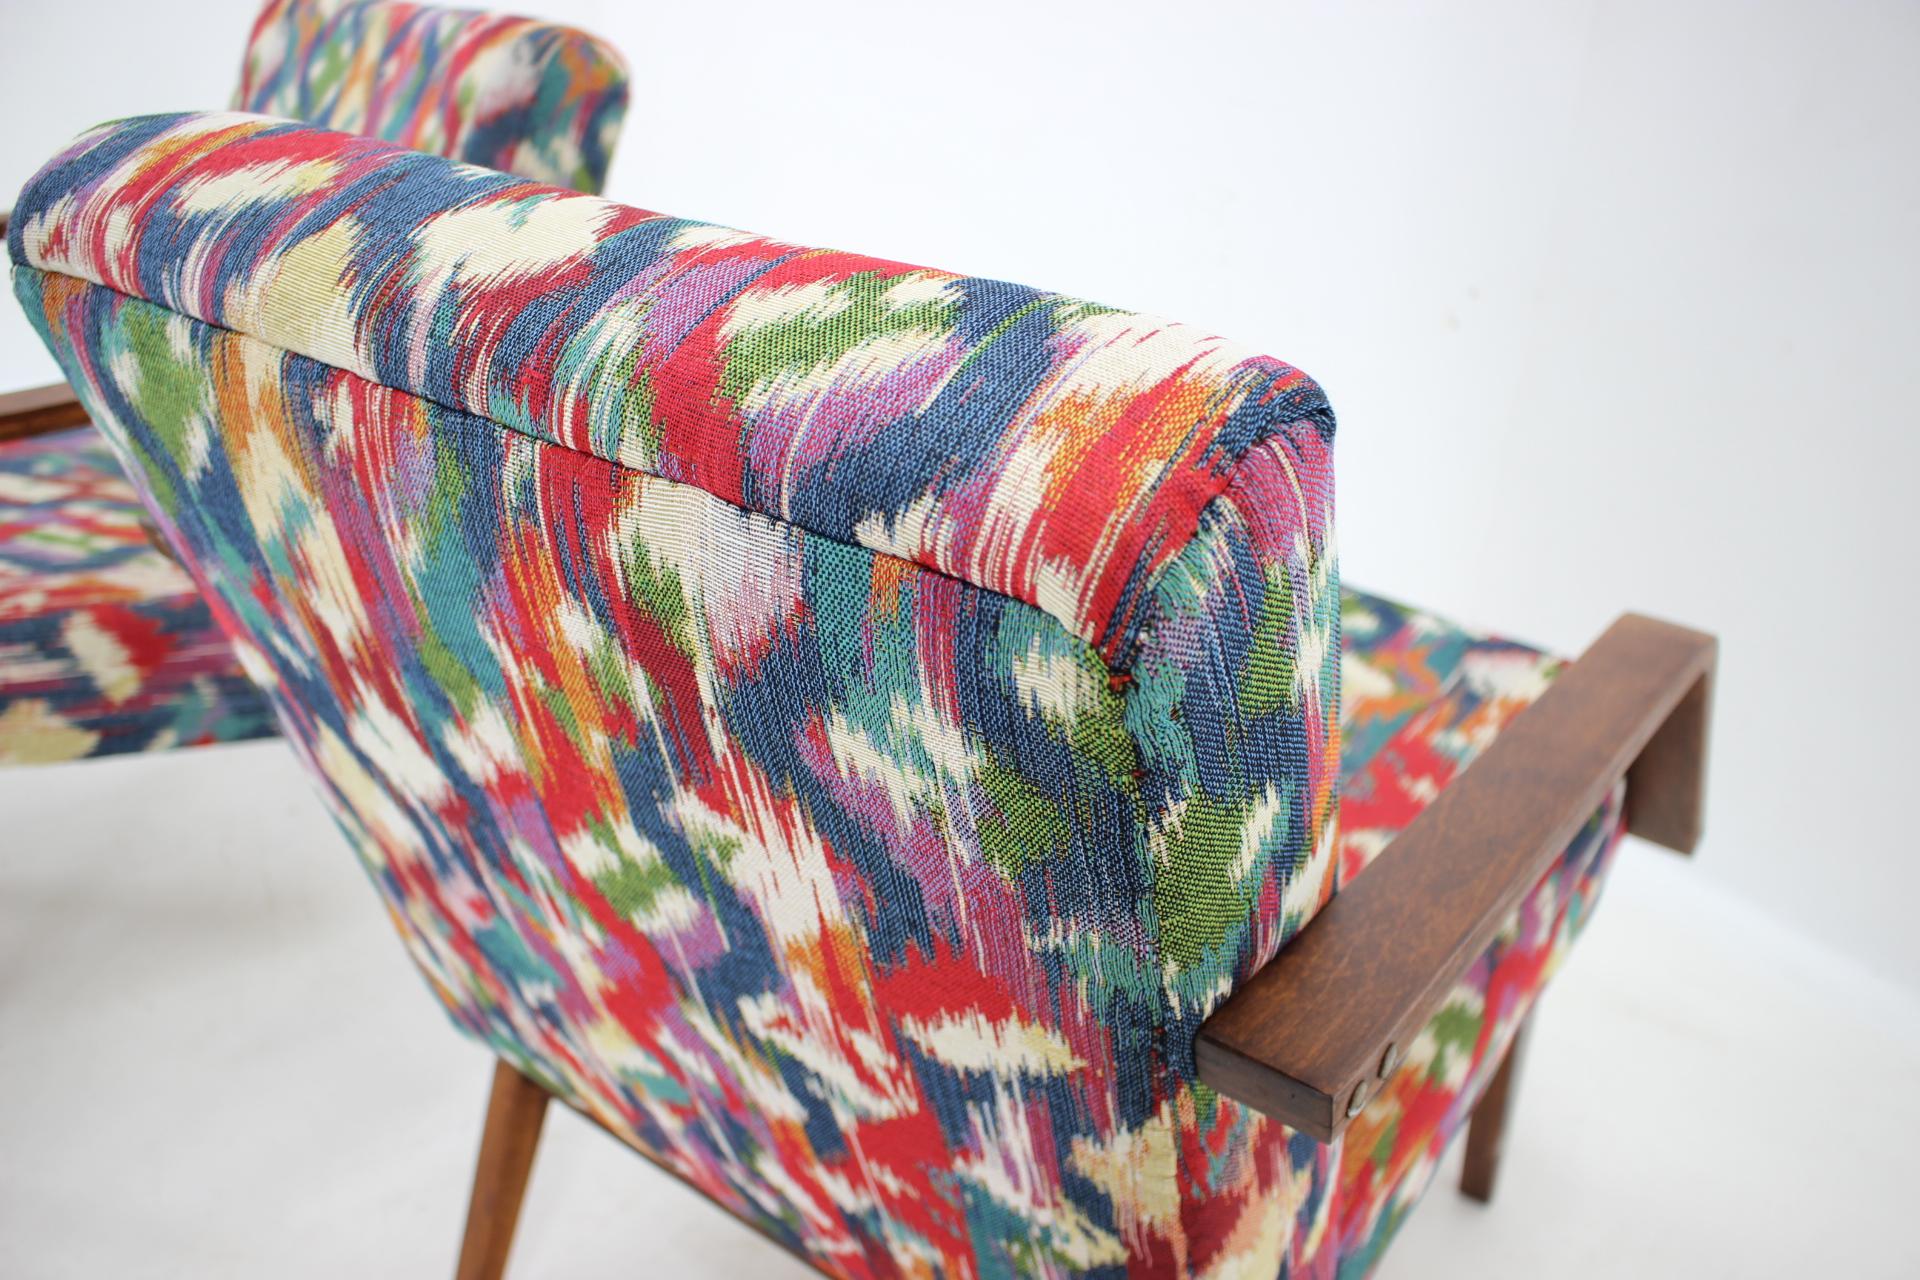 1960s Pair of Restored Armchairs, Czechoslovakia For Sale 5